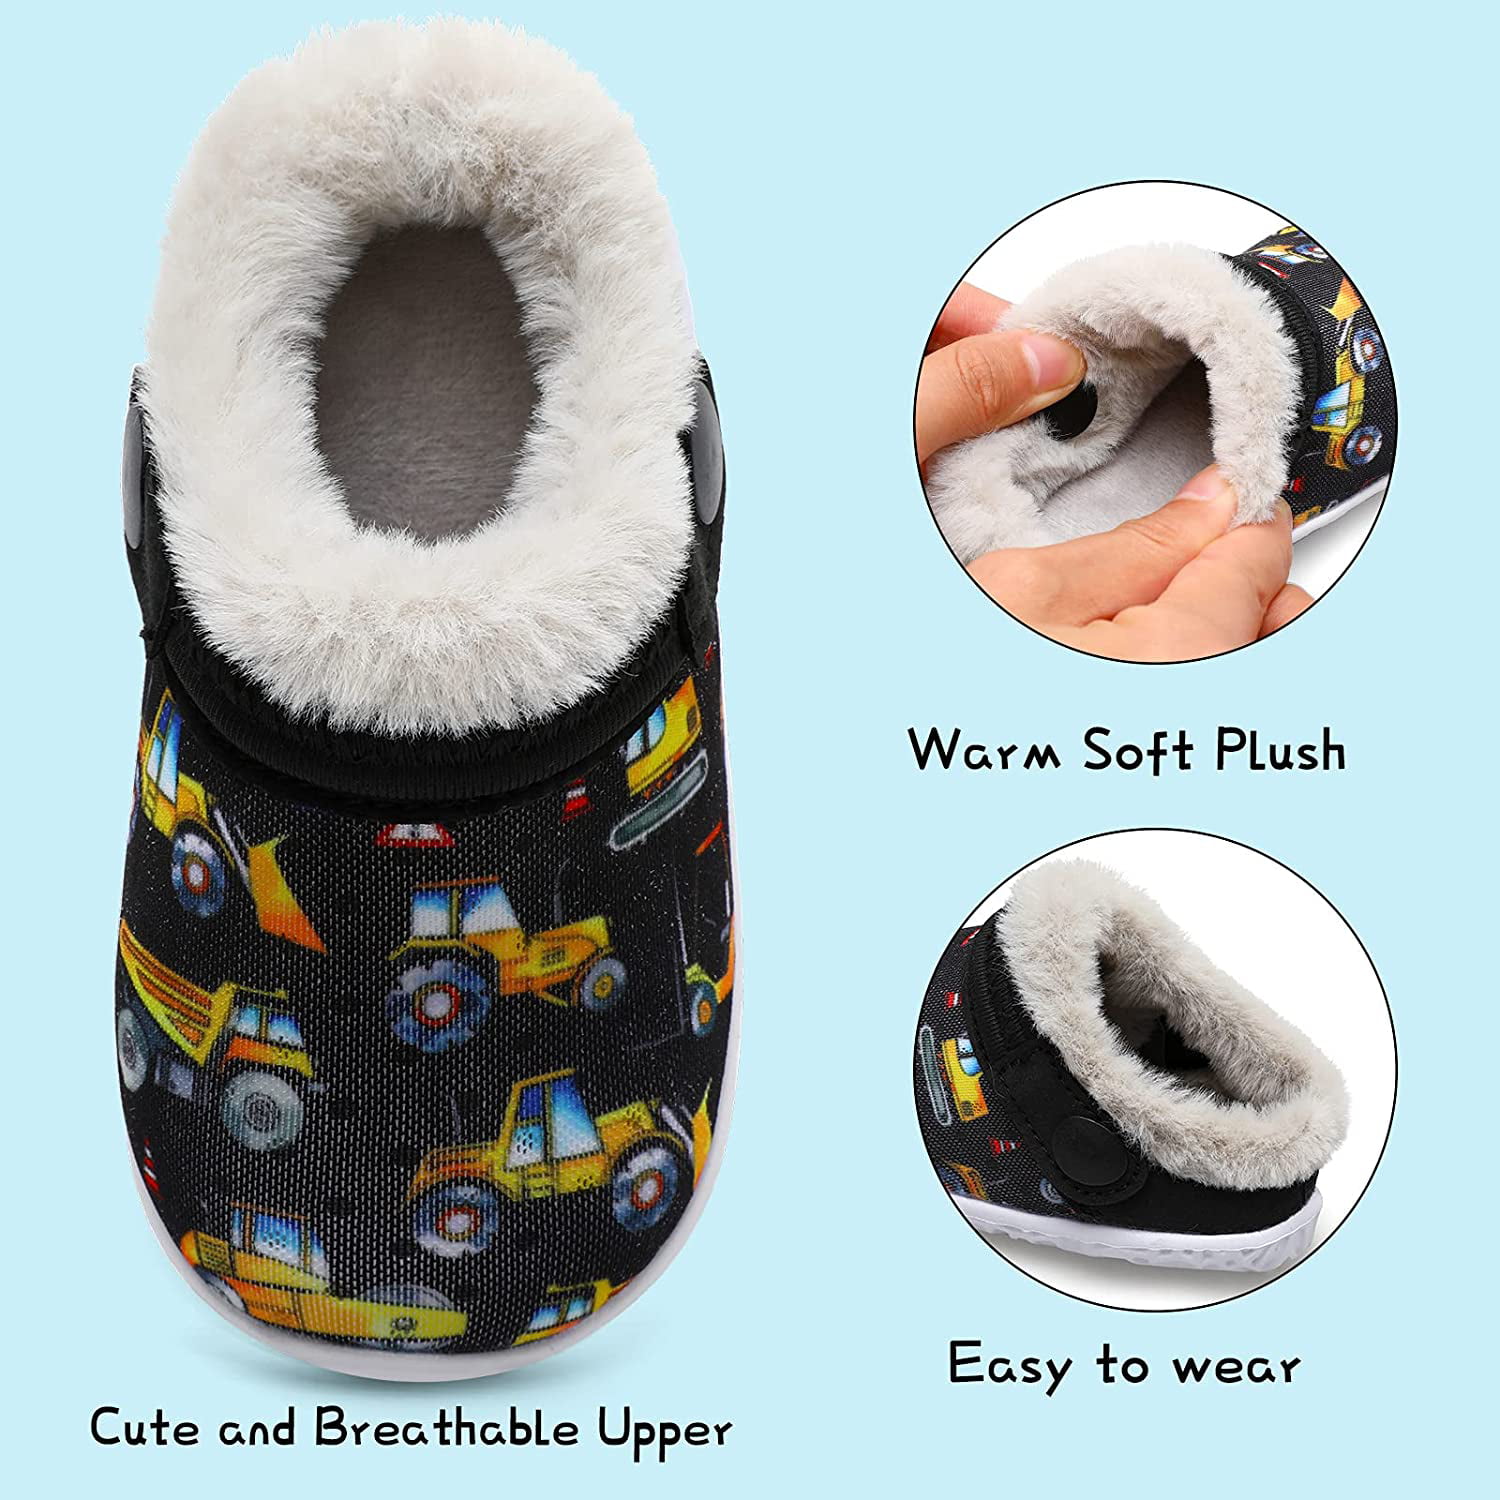 FIRES Baby Slippers Socks Toddlers Boys Girls House Slippers Little Kids Home Shoes with Warm Fuzzy Infant First Walk Walking Crib Shoes Lightweight Non-Slip Cartoon Kids shoes 